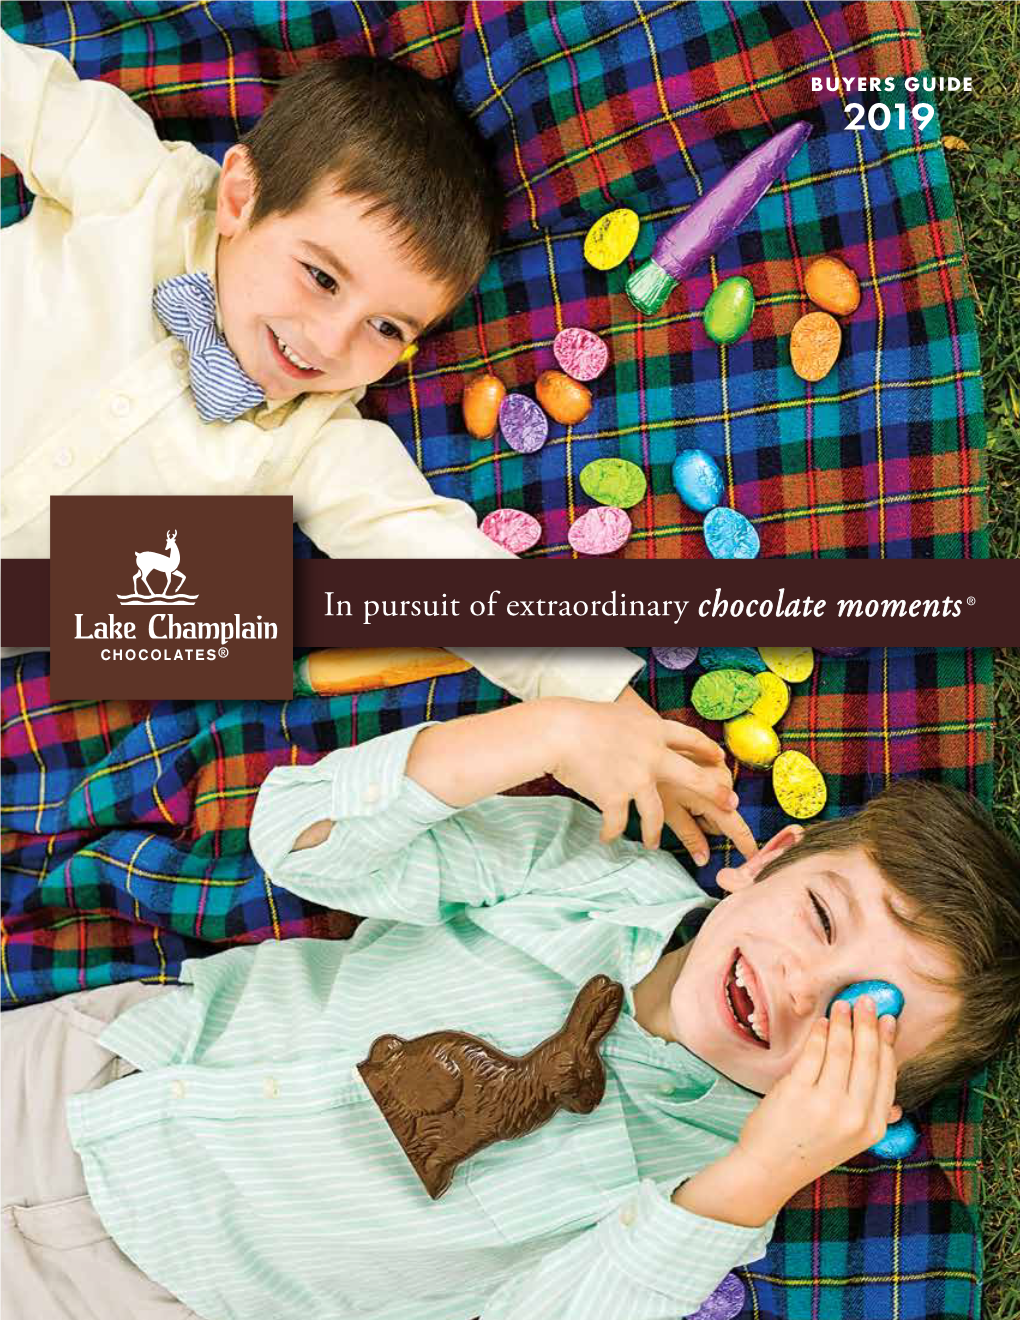 Lake Champlain Chocolates Continues to Be a Leader in the Chocolate Brand Category — Helping to Drive Chocolate Growth up 10.6% in the Last Year¹